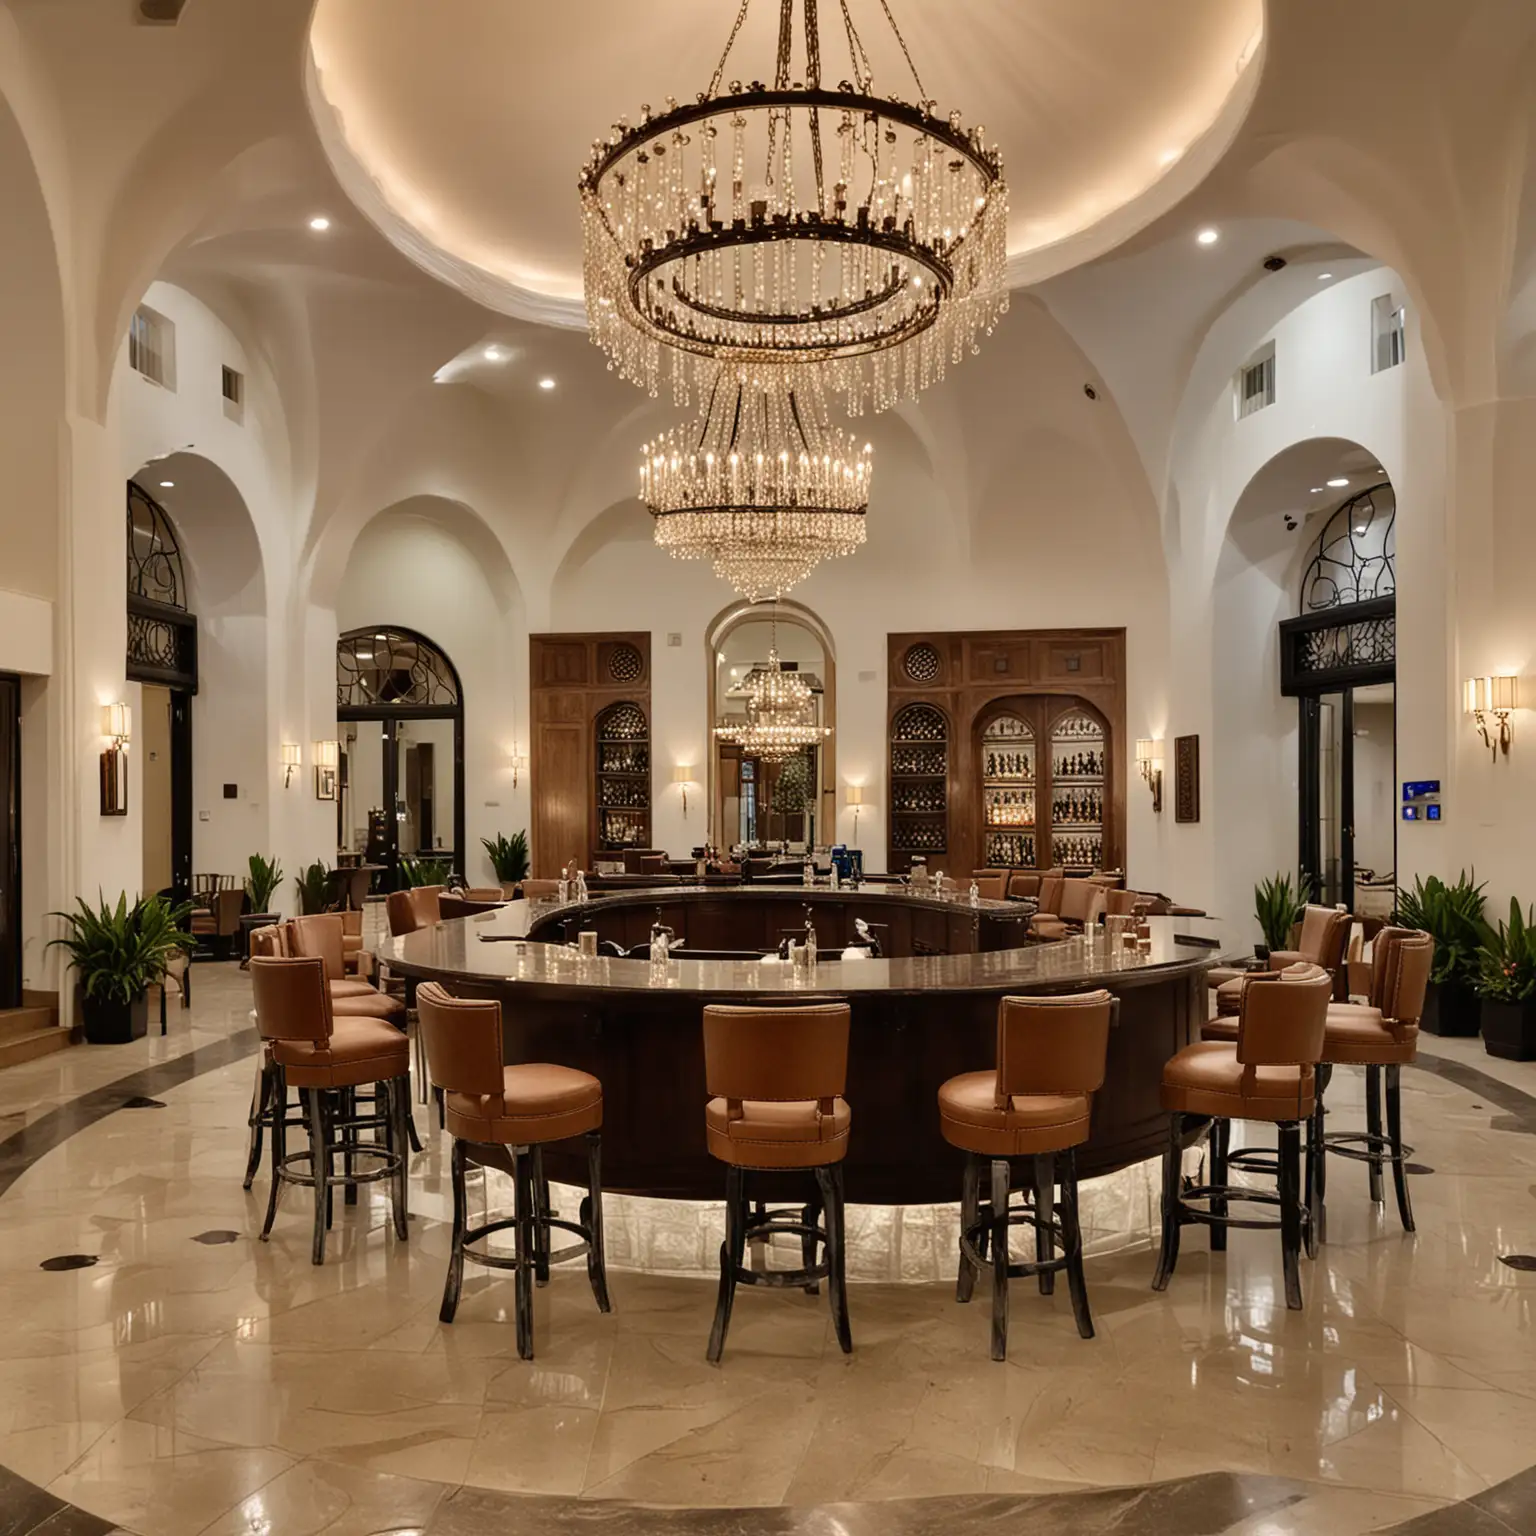 modern spanish colonial themed hotel circular bar in the middle of hotel lobby with large chandelier above and 40 barstools